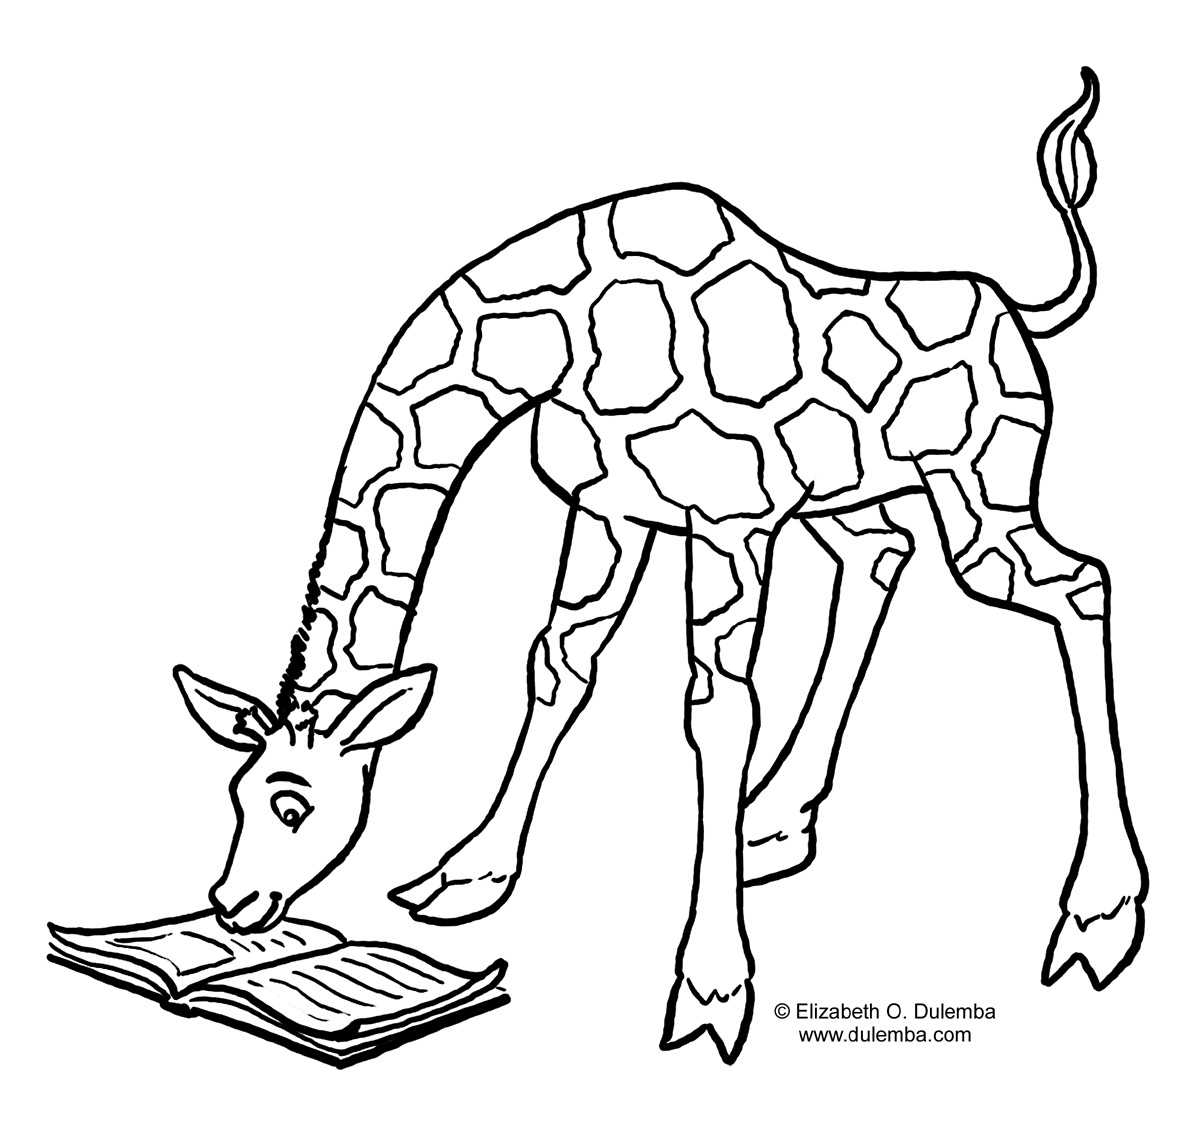 Download Coloring Pages for Kids: Giraffe Coloring Pages for Kids